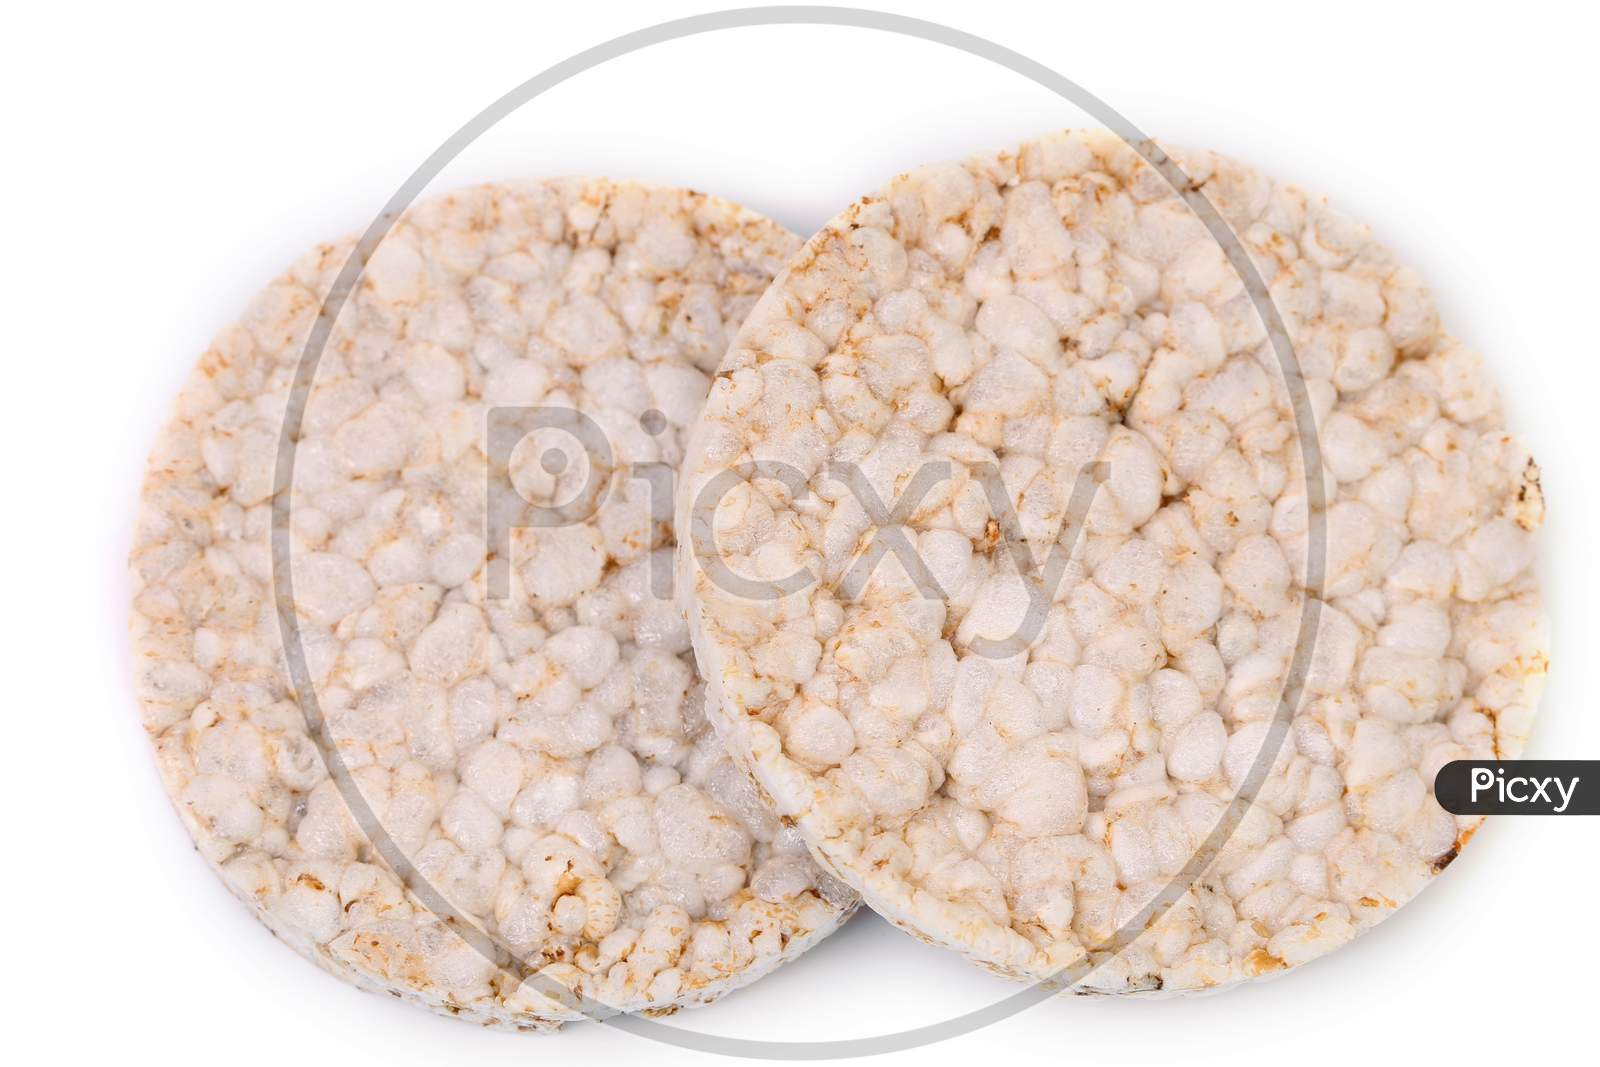 Close Up Of Puffed Rice Snack. Isolated On A White Background.